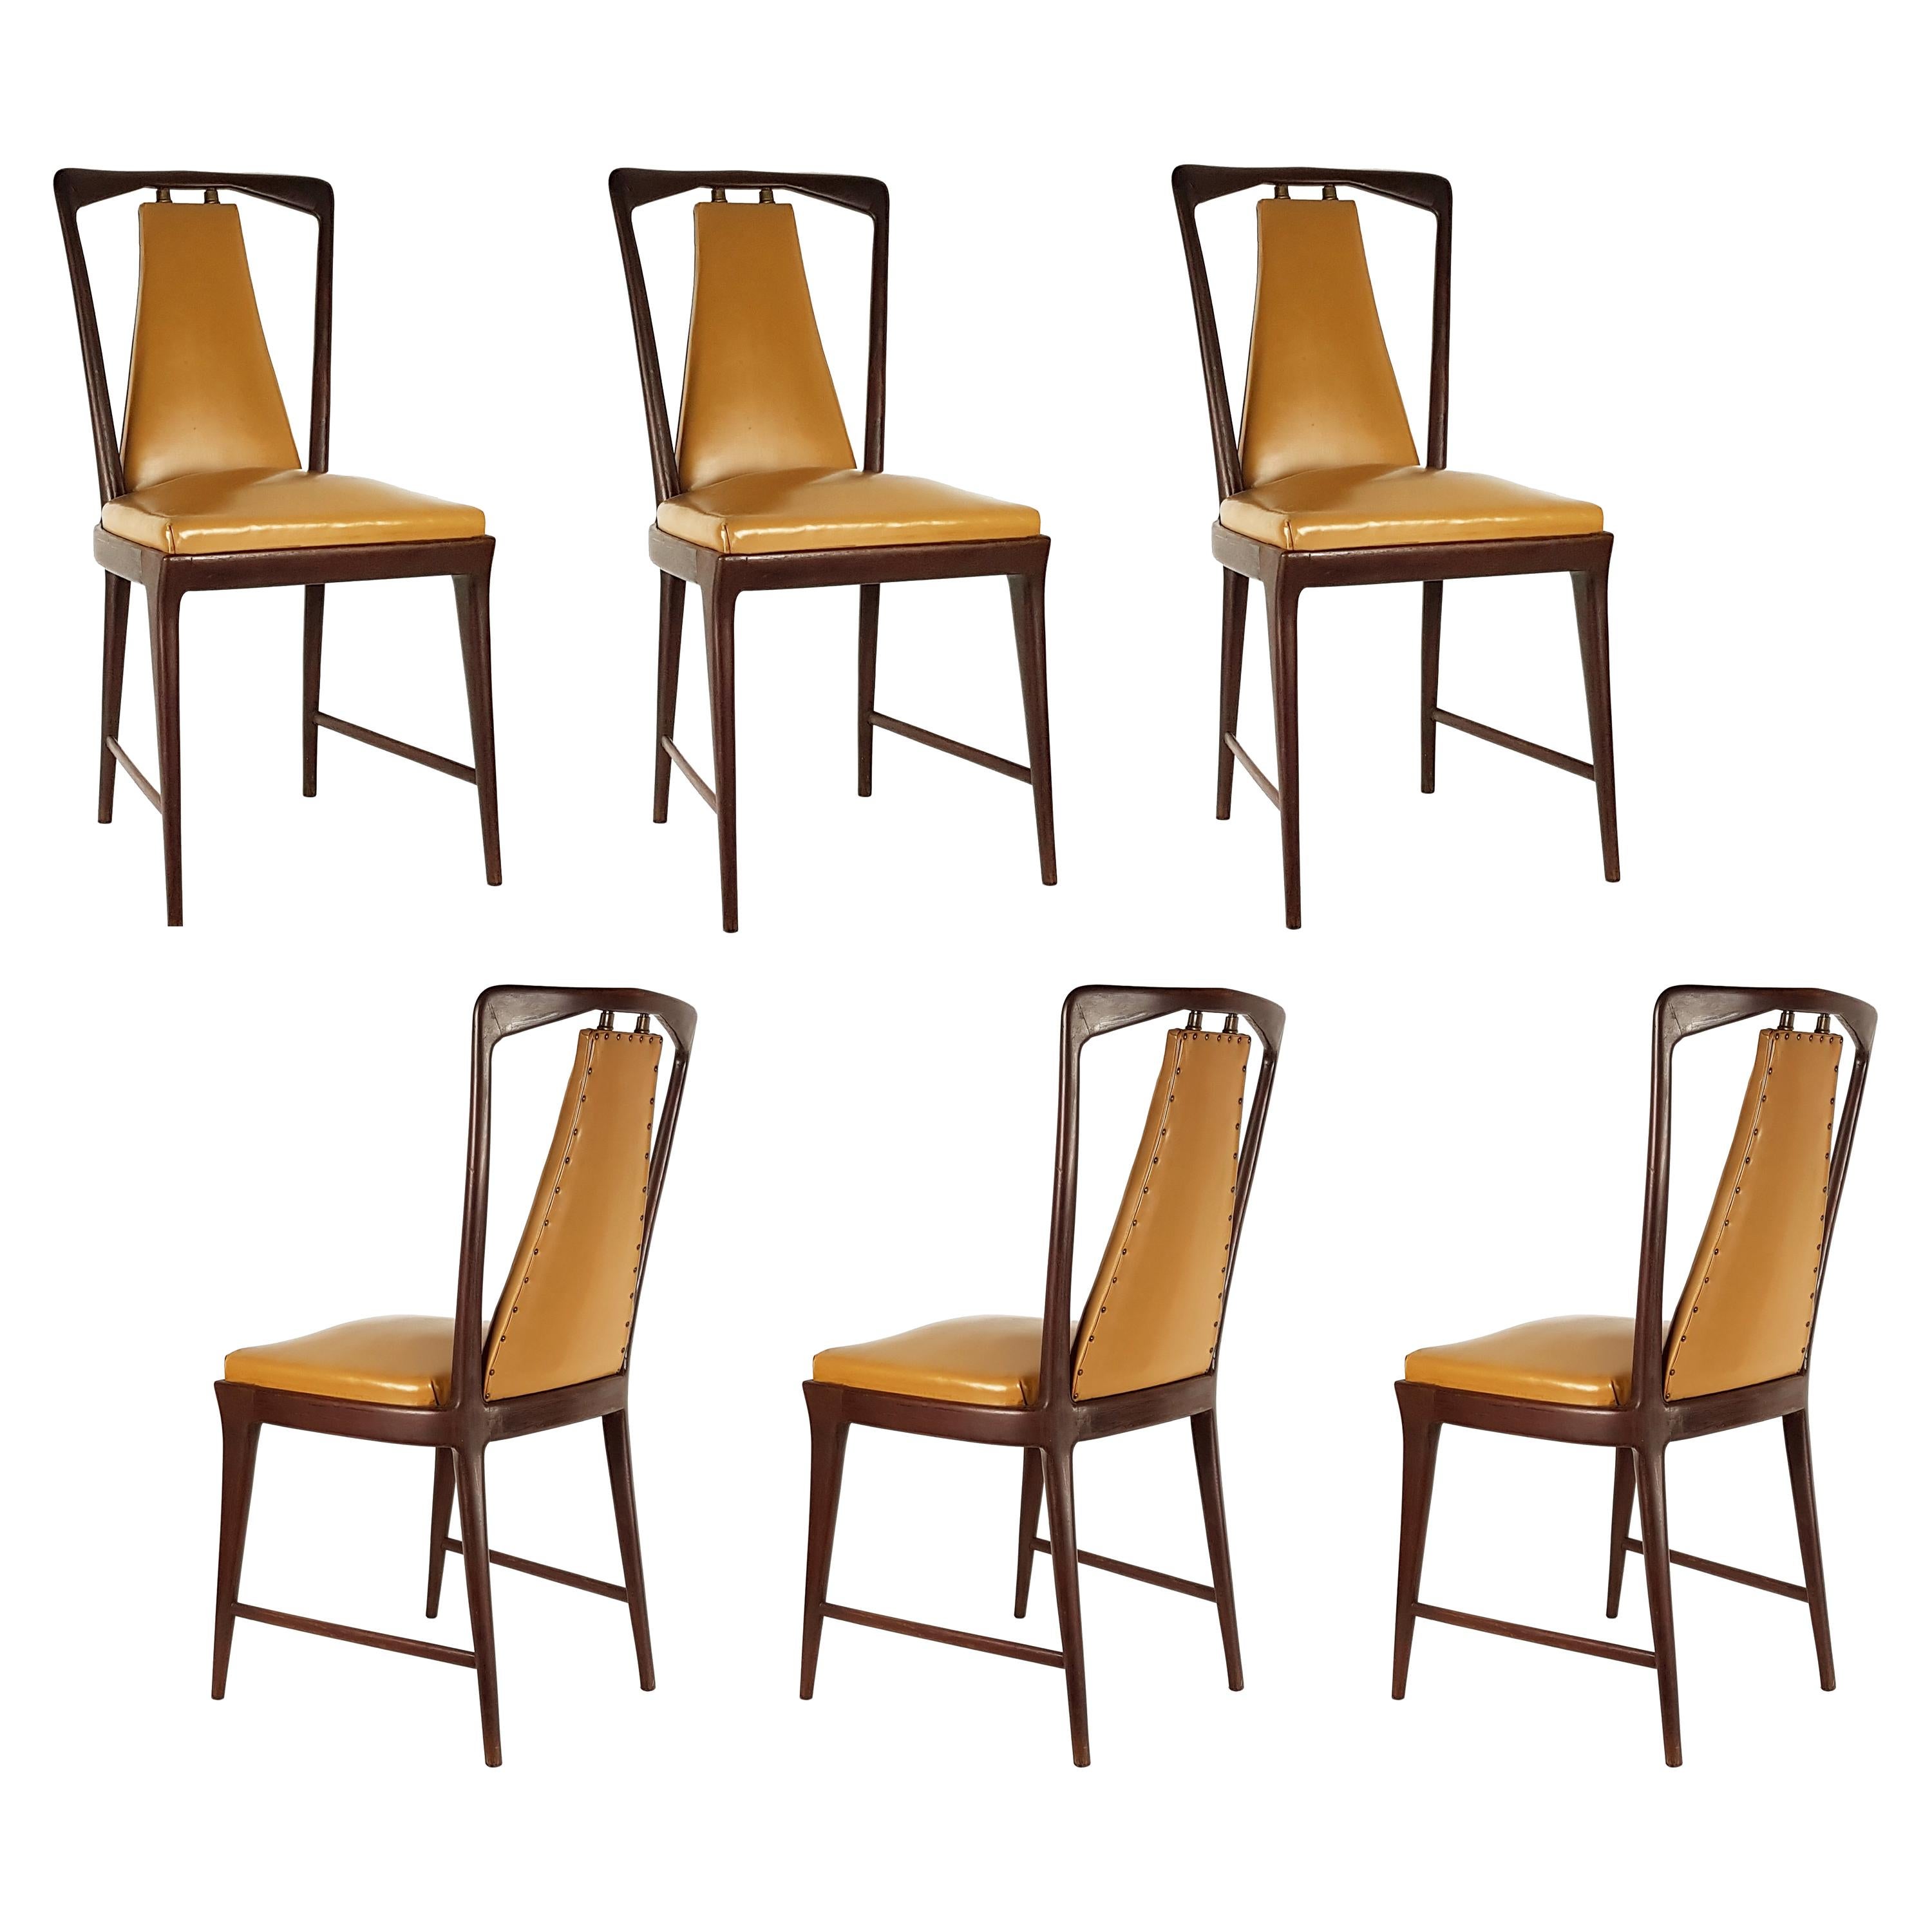 6 Light-Brown Skai and Wood 1940s Dining Chairs in the Style of Osvaldo Borsani